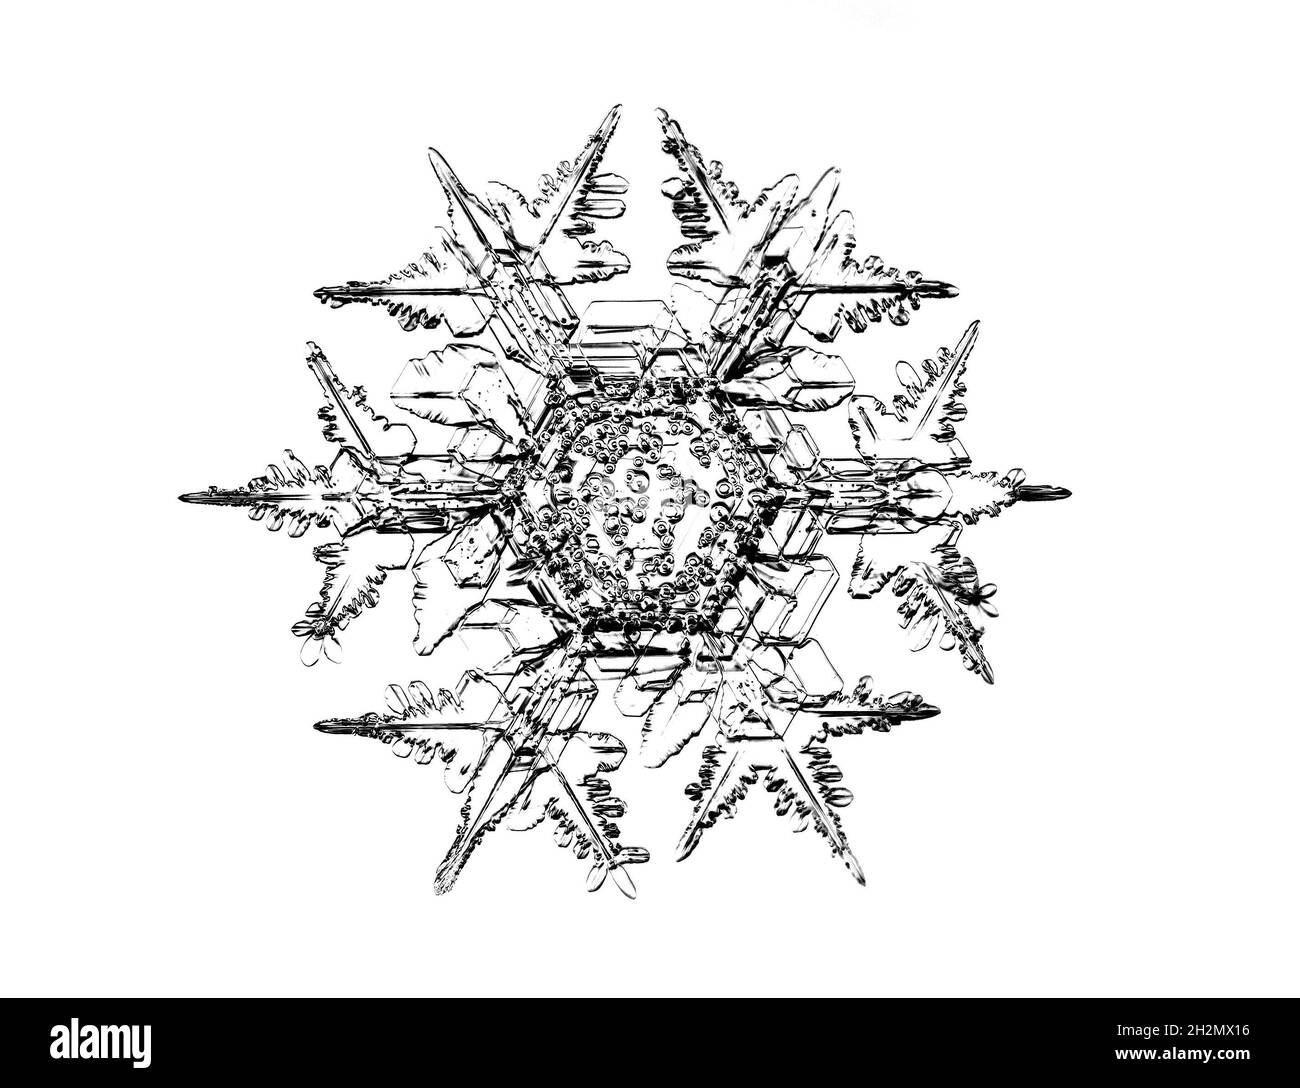 Black snowflake isolated on white background. Illustration based on macro photo of real snow crystal: elegant star plate with short, broad arms Stock Photo